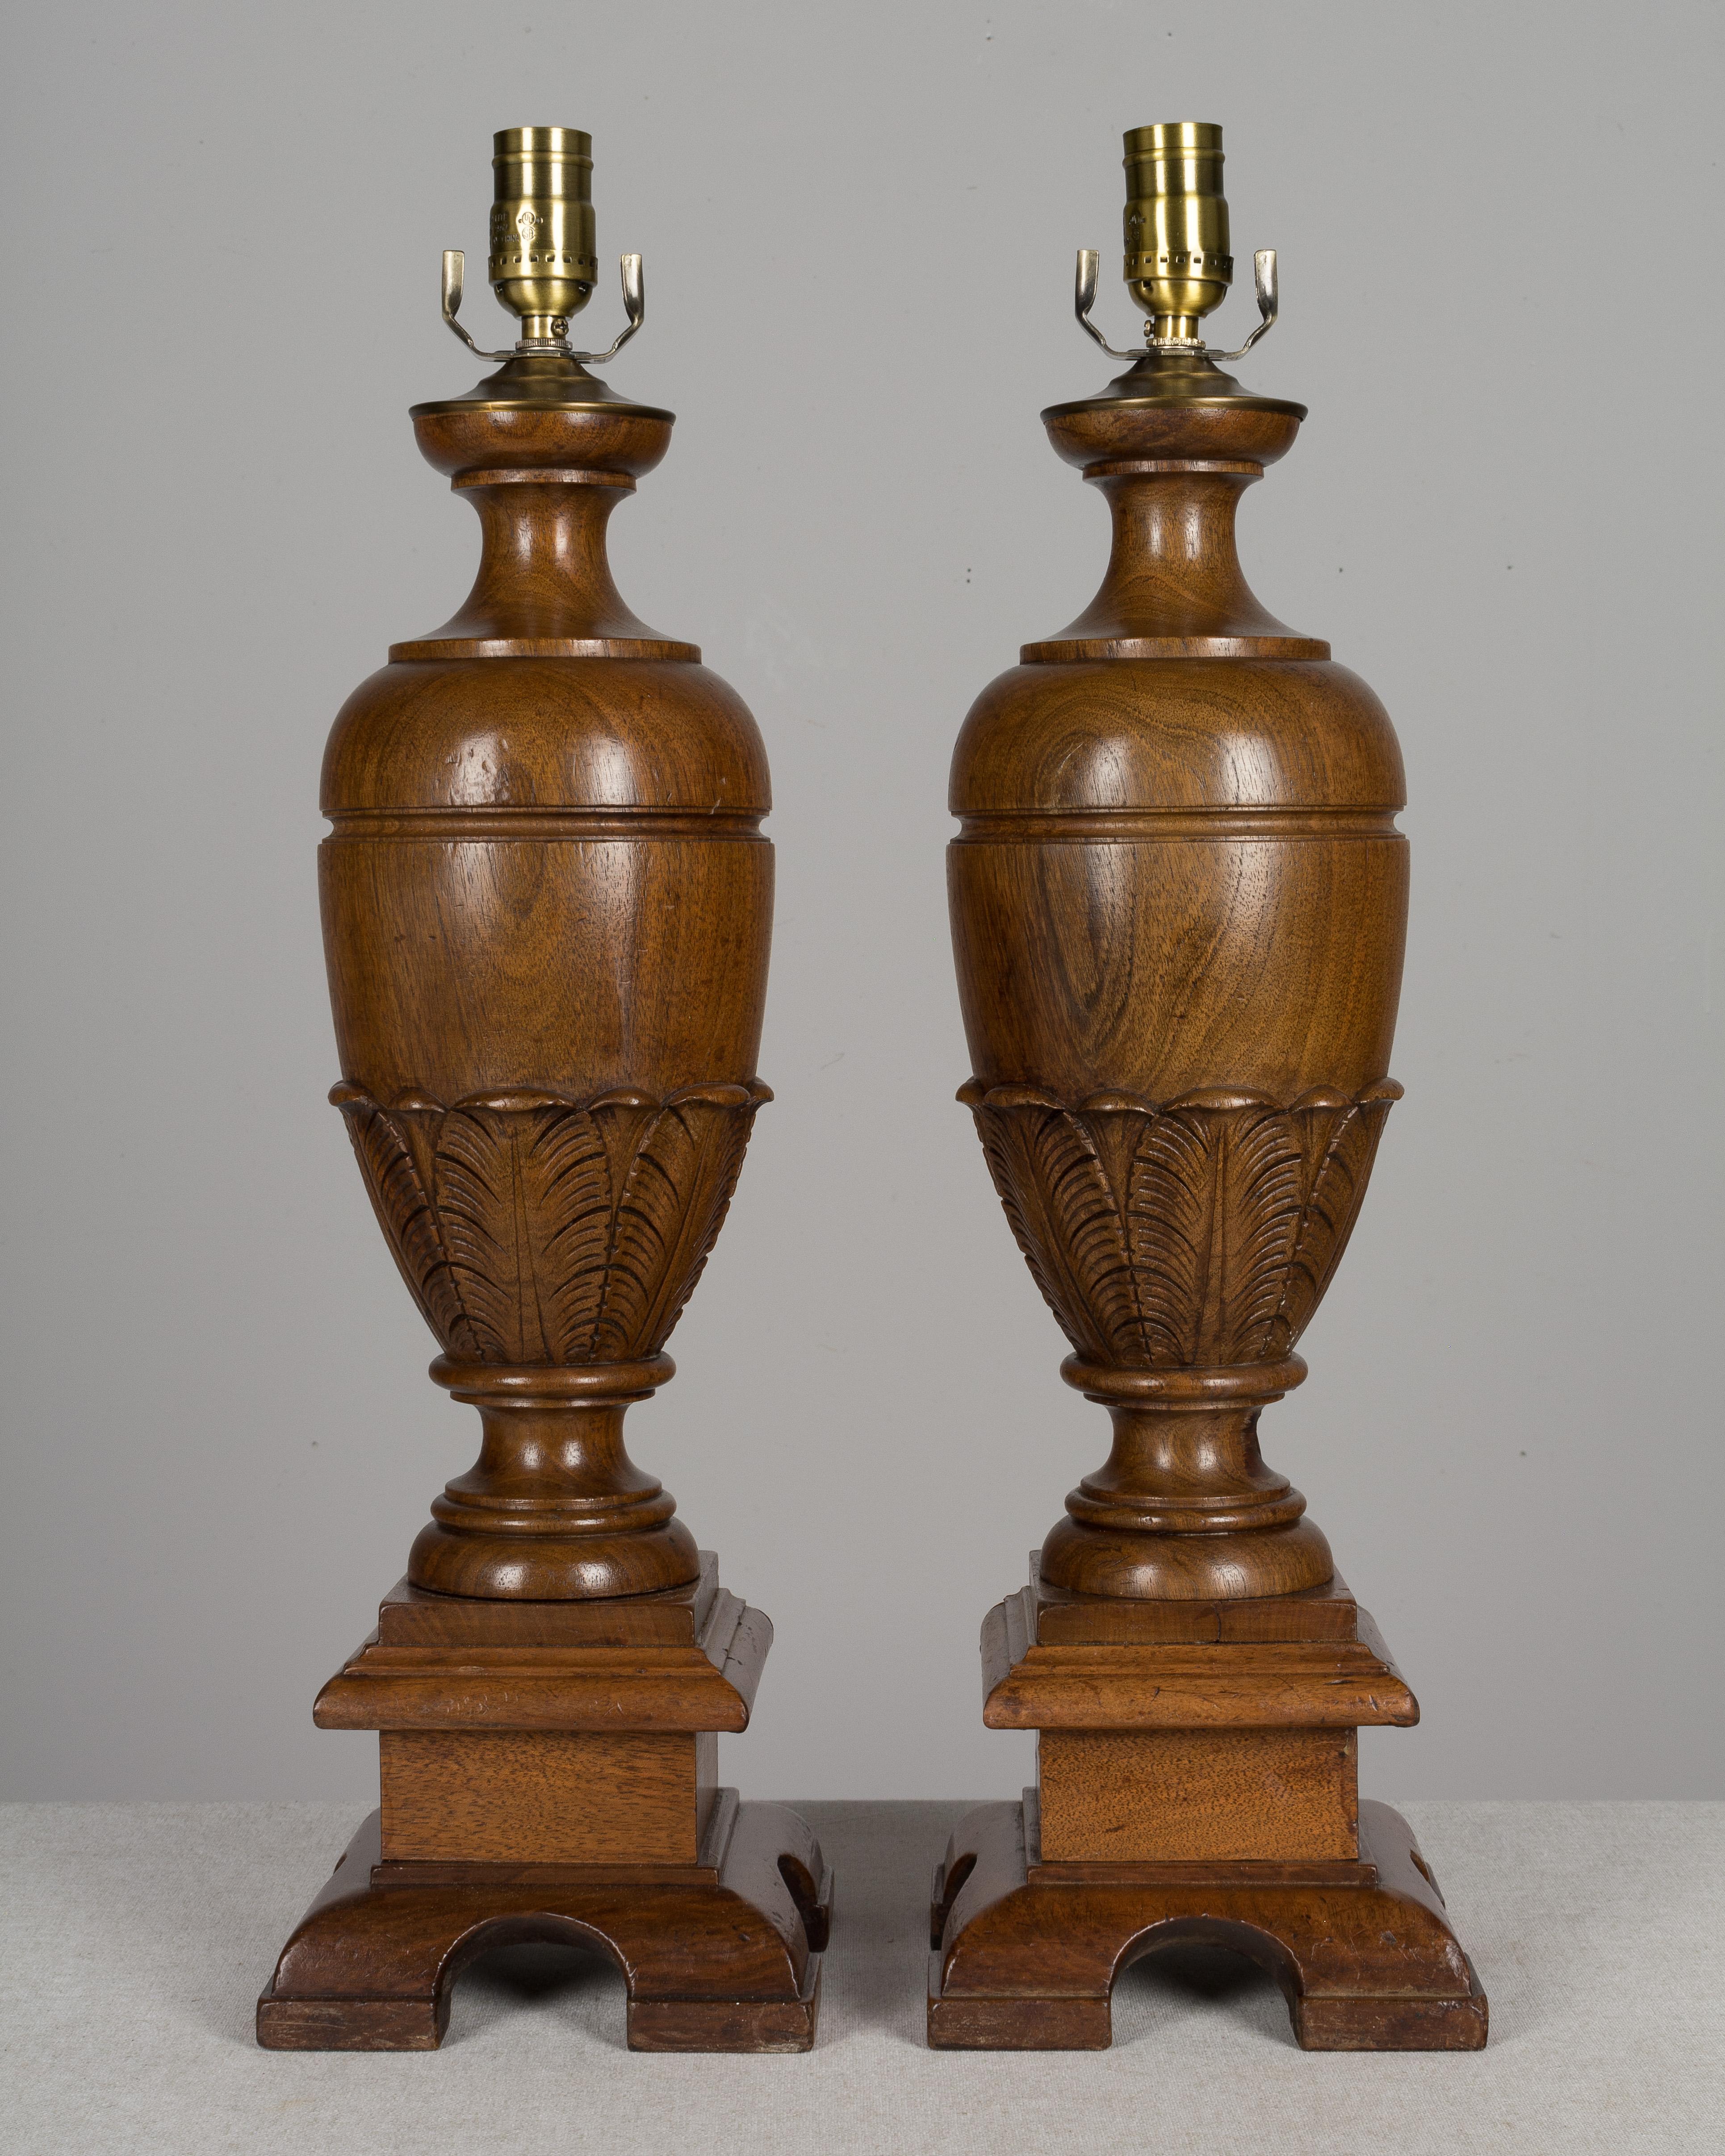 A pair of French baluster form table lamps made of solid turned walnut with carved decorative details. Made from the legs of a table. Antique brass finished caps and sockets. The shades measure 14